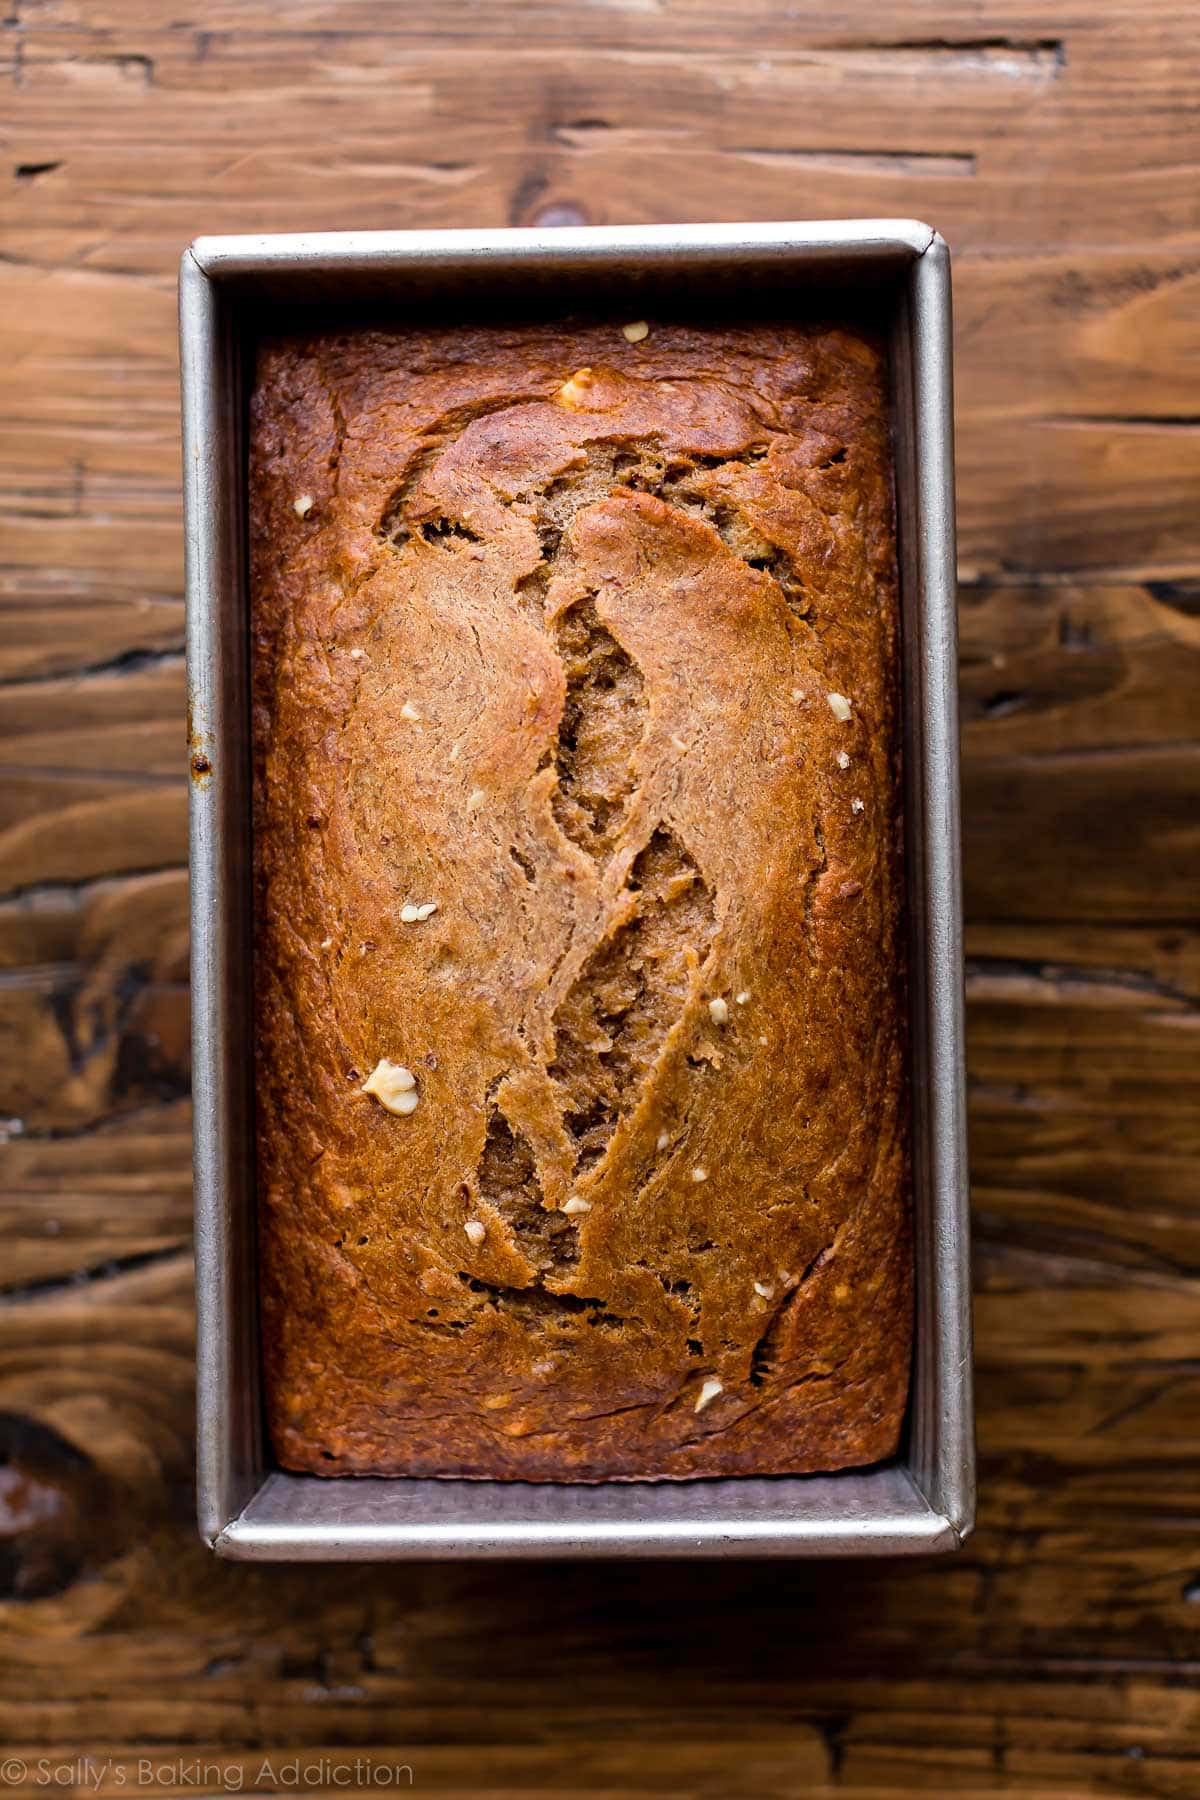 baked banana bread in a loaf pan